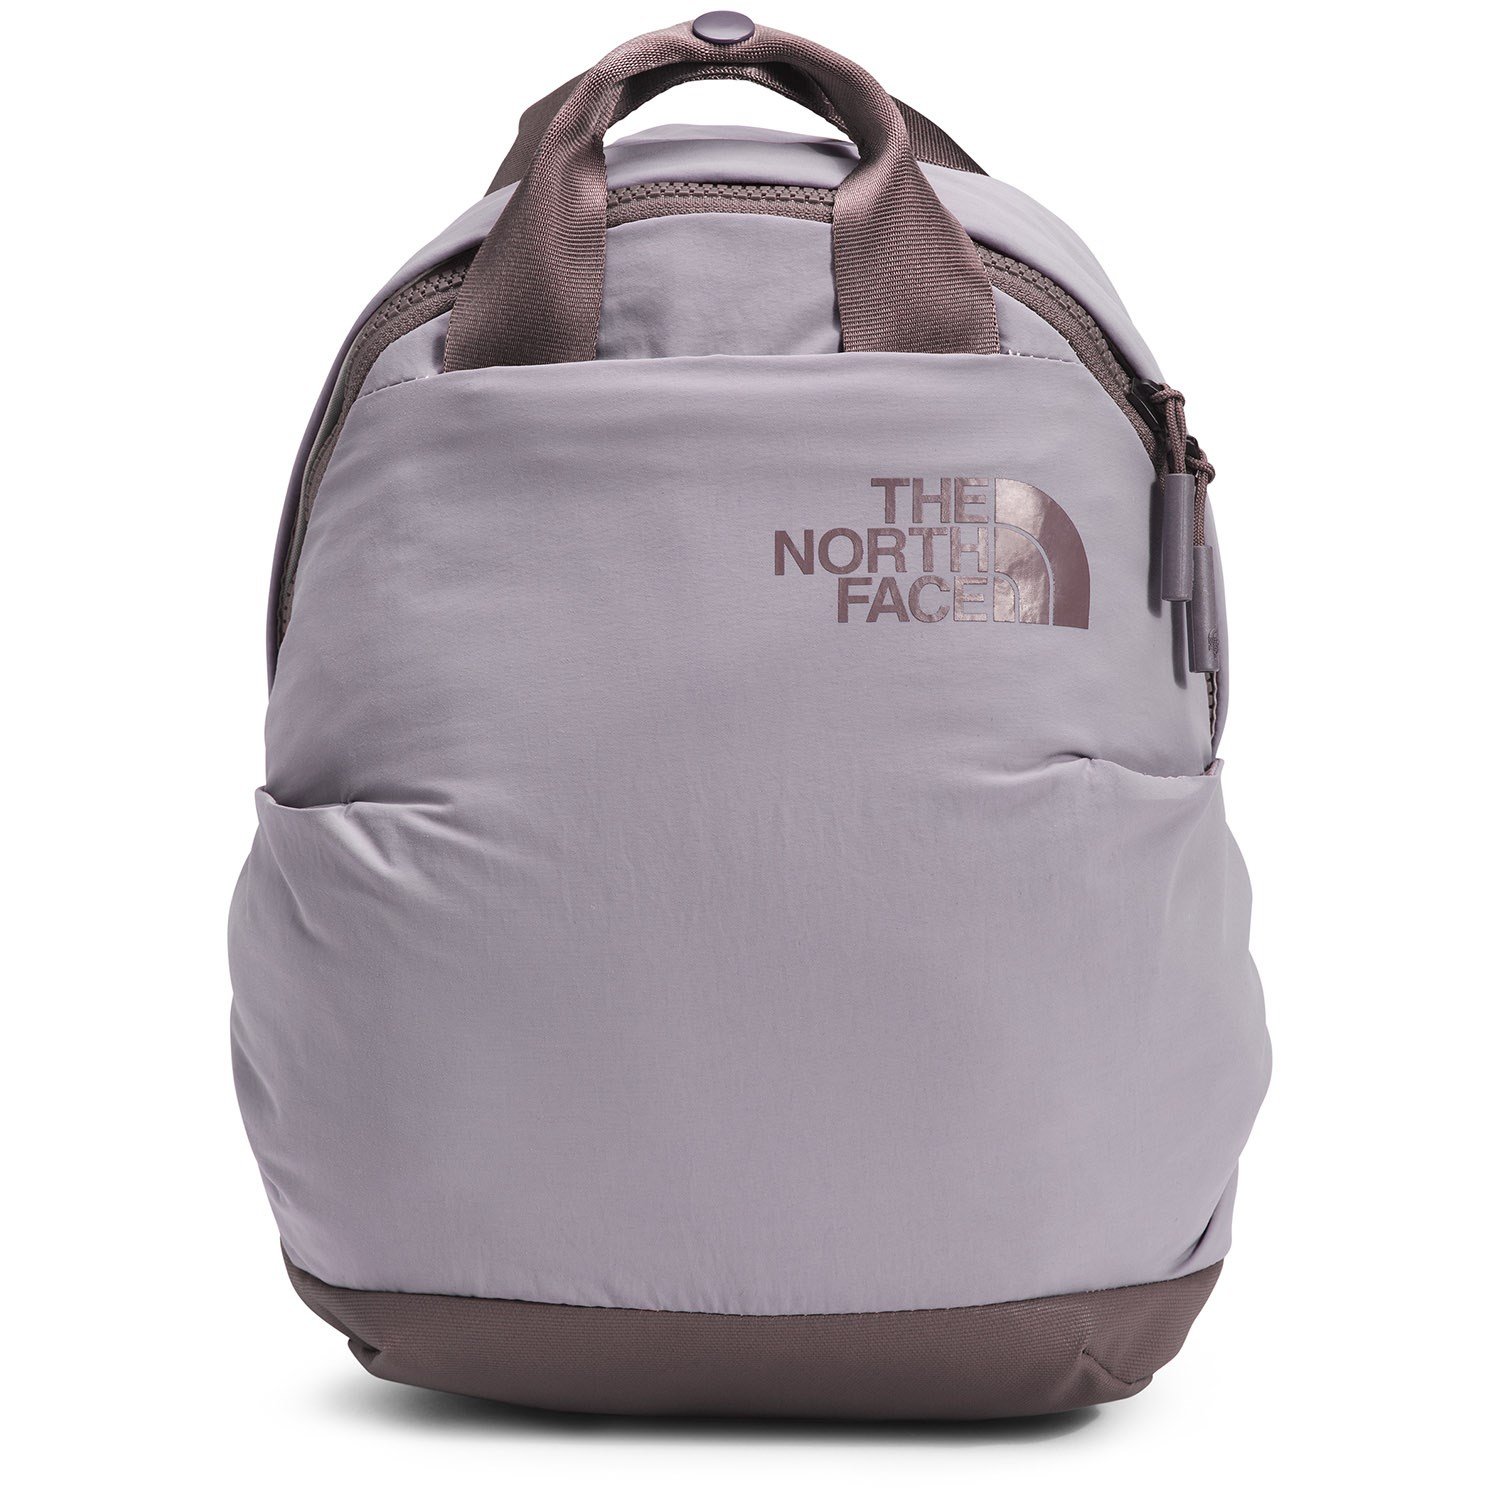 The North Face Borealis Mini Backpack Review (2 Weeks of Use) 